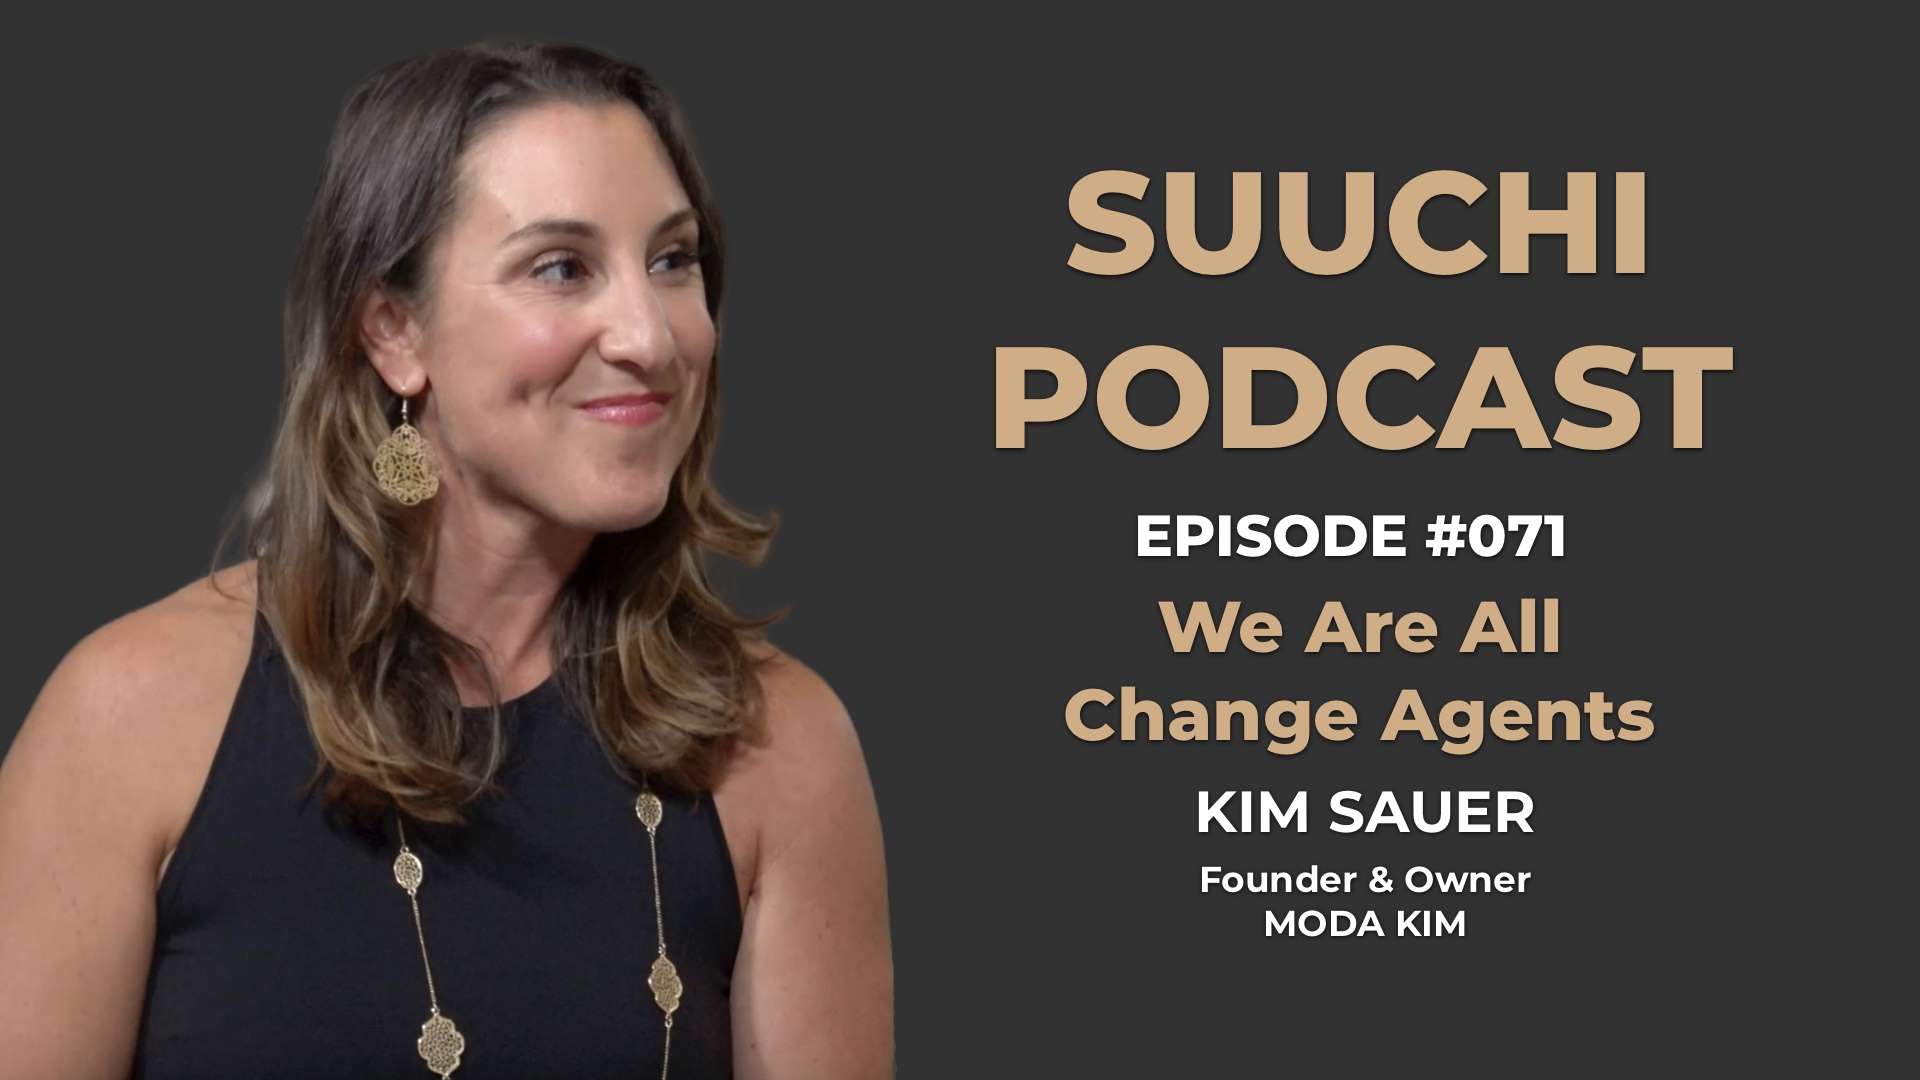 Suuchi Podcast #71: Kim Sauer, Founder & Owner of Moda Kim - We Are All Change Agents